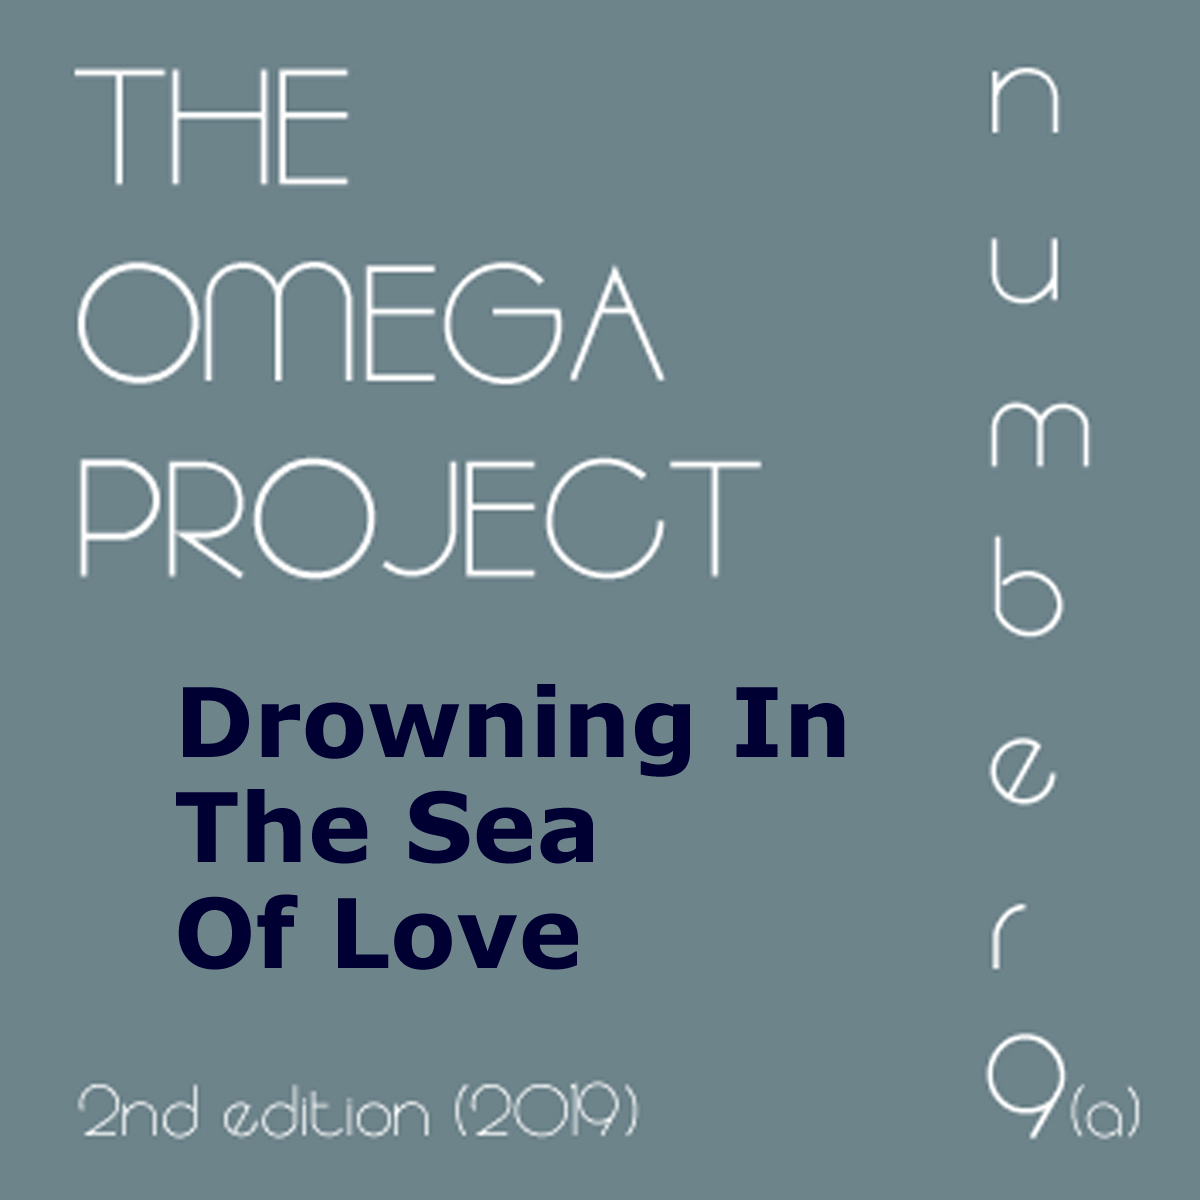 The Omega Project – Number 9a – Drowning In The Sea Of Love – 3 S 1